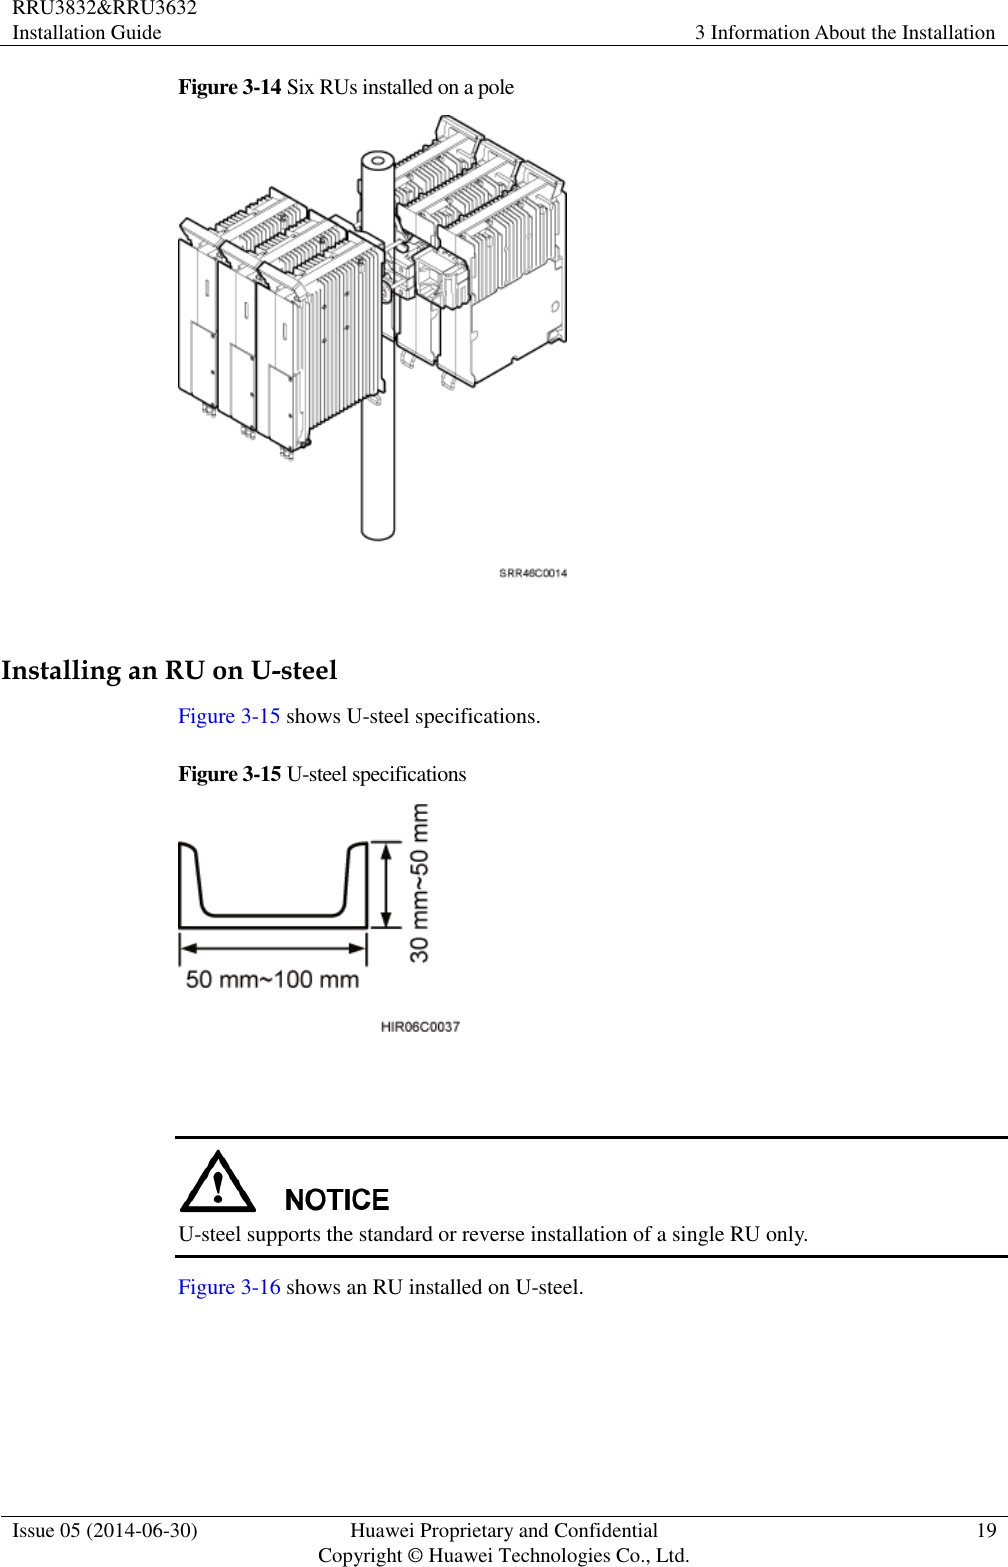 RRU3832&amp;RRU3632 Installation Guide 3 Information About the Installation  Issue 05 (2014-06-30) Huawei Proprietary and Confidential                                     Copyright © Huawei Technologies Co., Ltd. 19  Figure 3-14 Six RUs installed on a pole   Installing an RU on U-steel Figure 3-15 shows U-steel specifications. Figure 3-15 U-steel specifications     U-steel supports the standard or reverse installation of a single RU only. Figure 3-16 shows an RU installed on U-steel. 